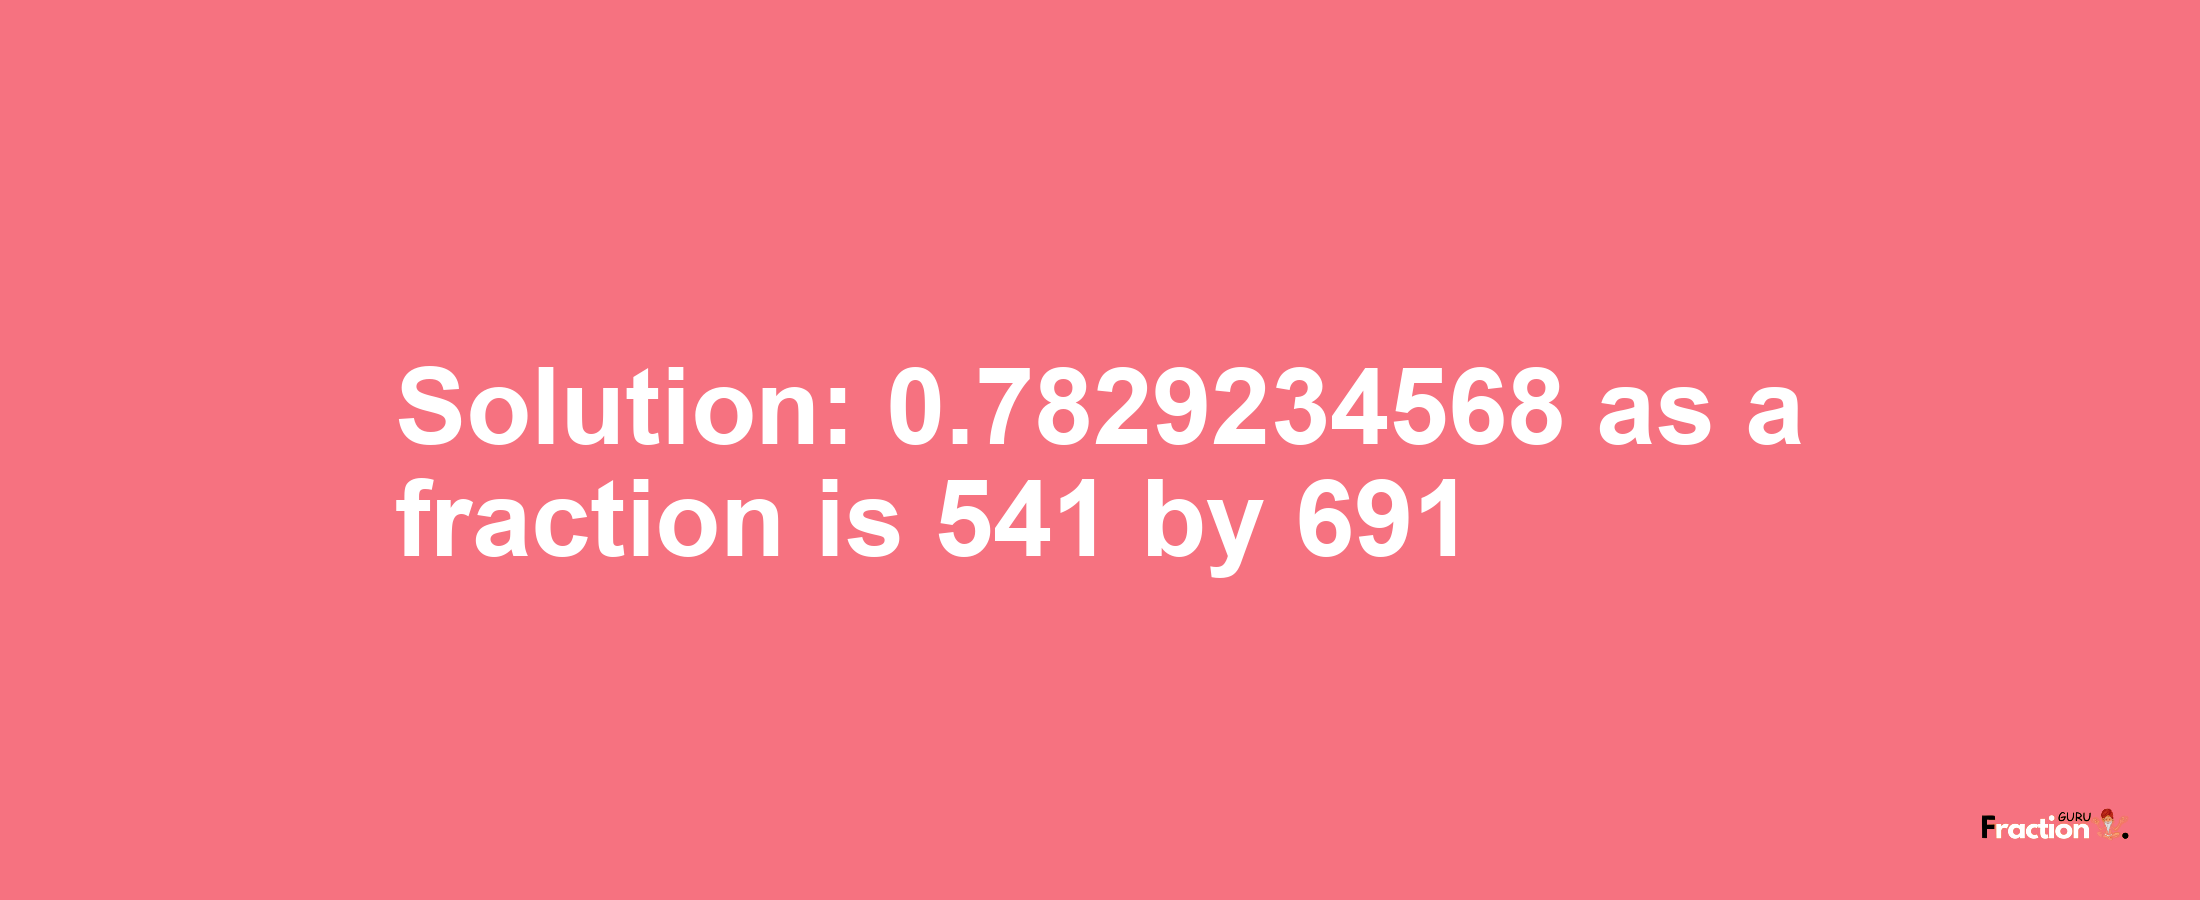 Solution:0.7829234568 as a fraction is 541/691